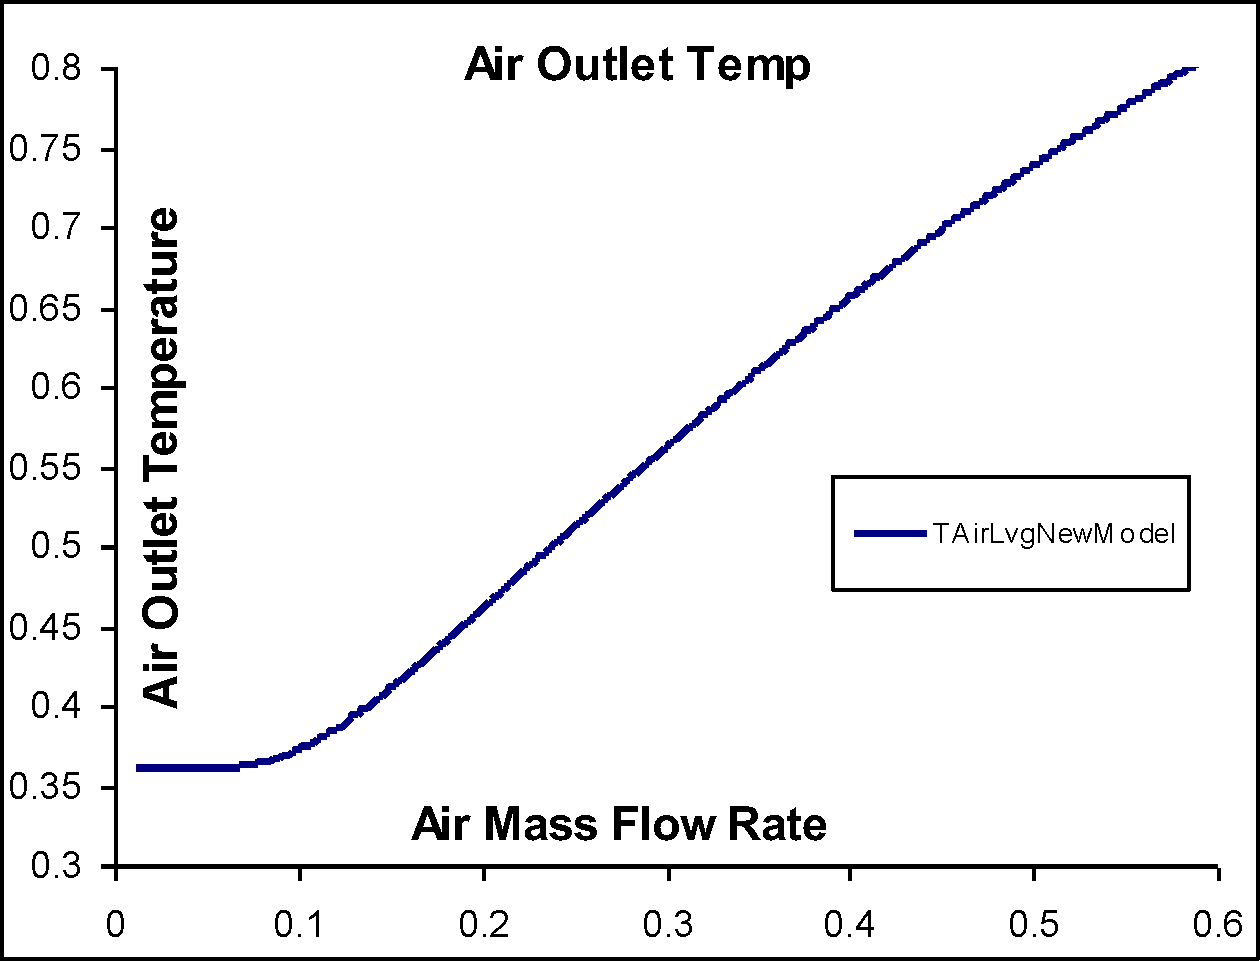 Air Outlet Temperature Vs Air Mass Flow Rate